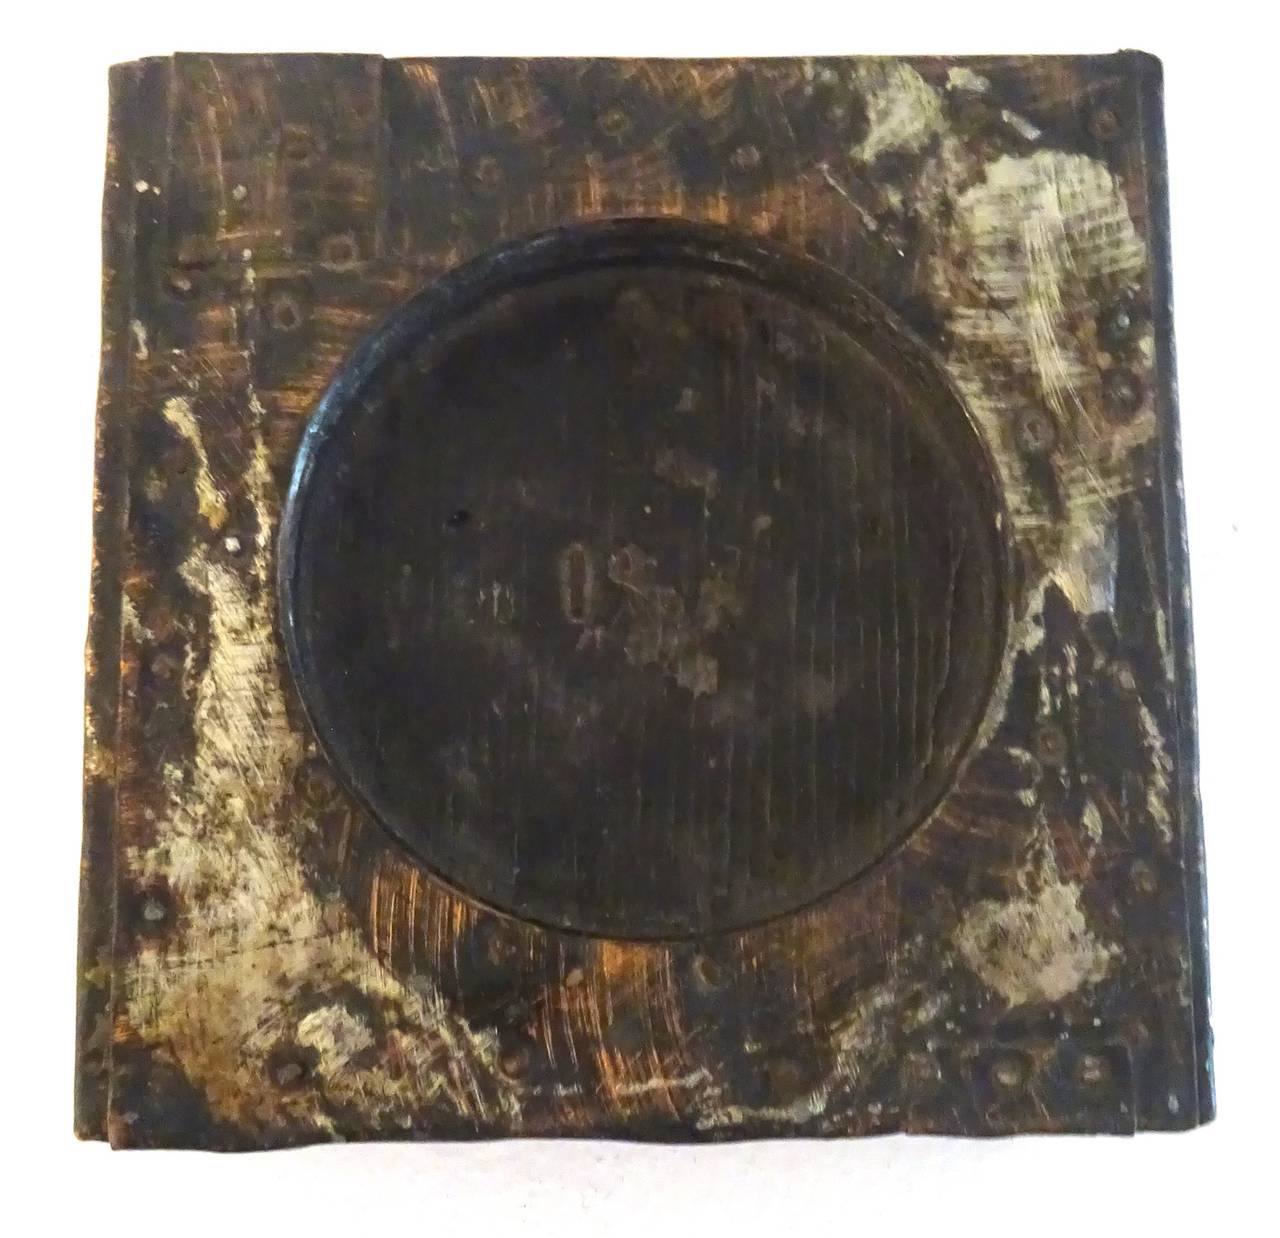 Brutalist 1960s Paul Evans Patchwork Metal Ashtray In Excellent Condition For Sale In Washington, DC